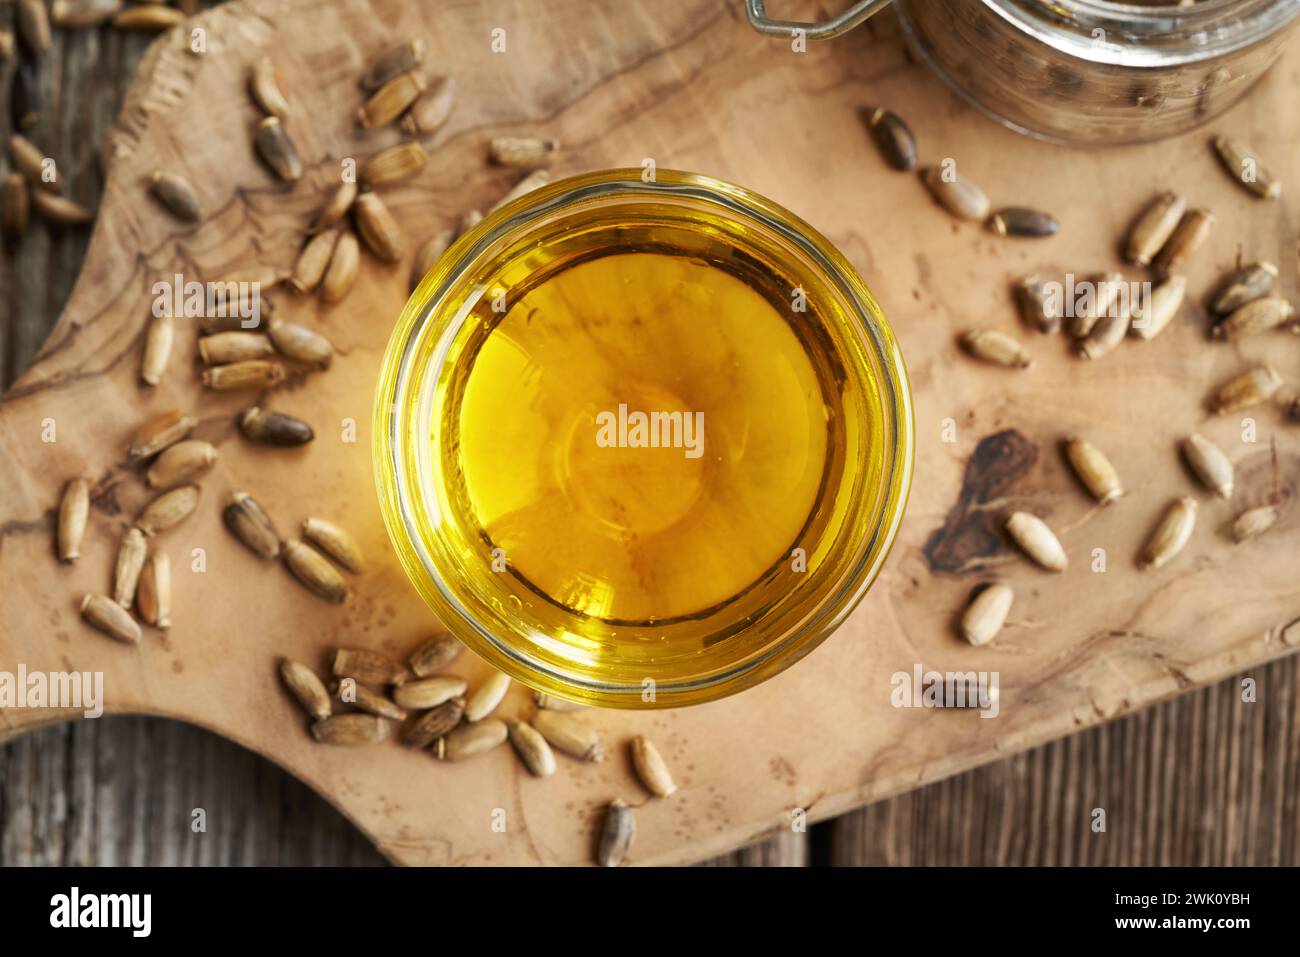 Milk thistle oil in a glass bowl with Carduus marianus seeds, top view Stock Photo